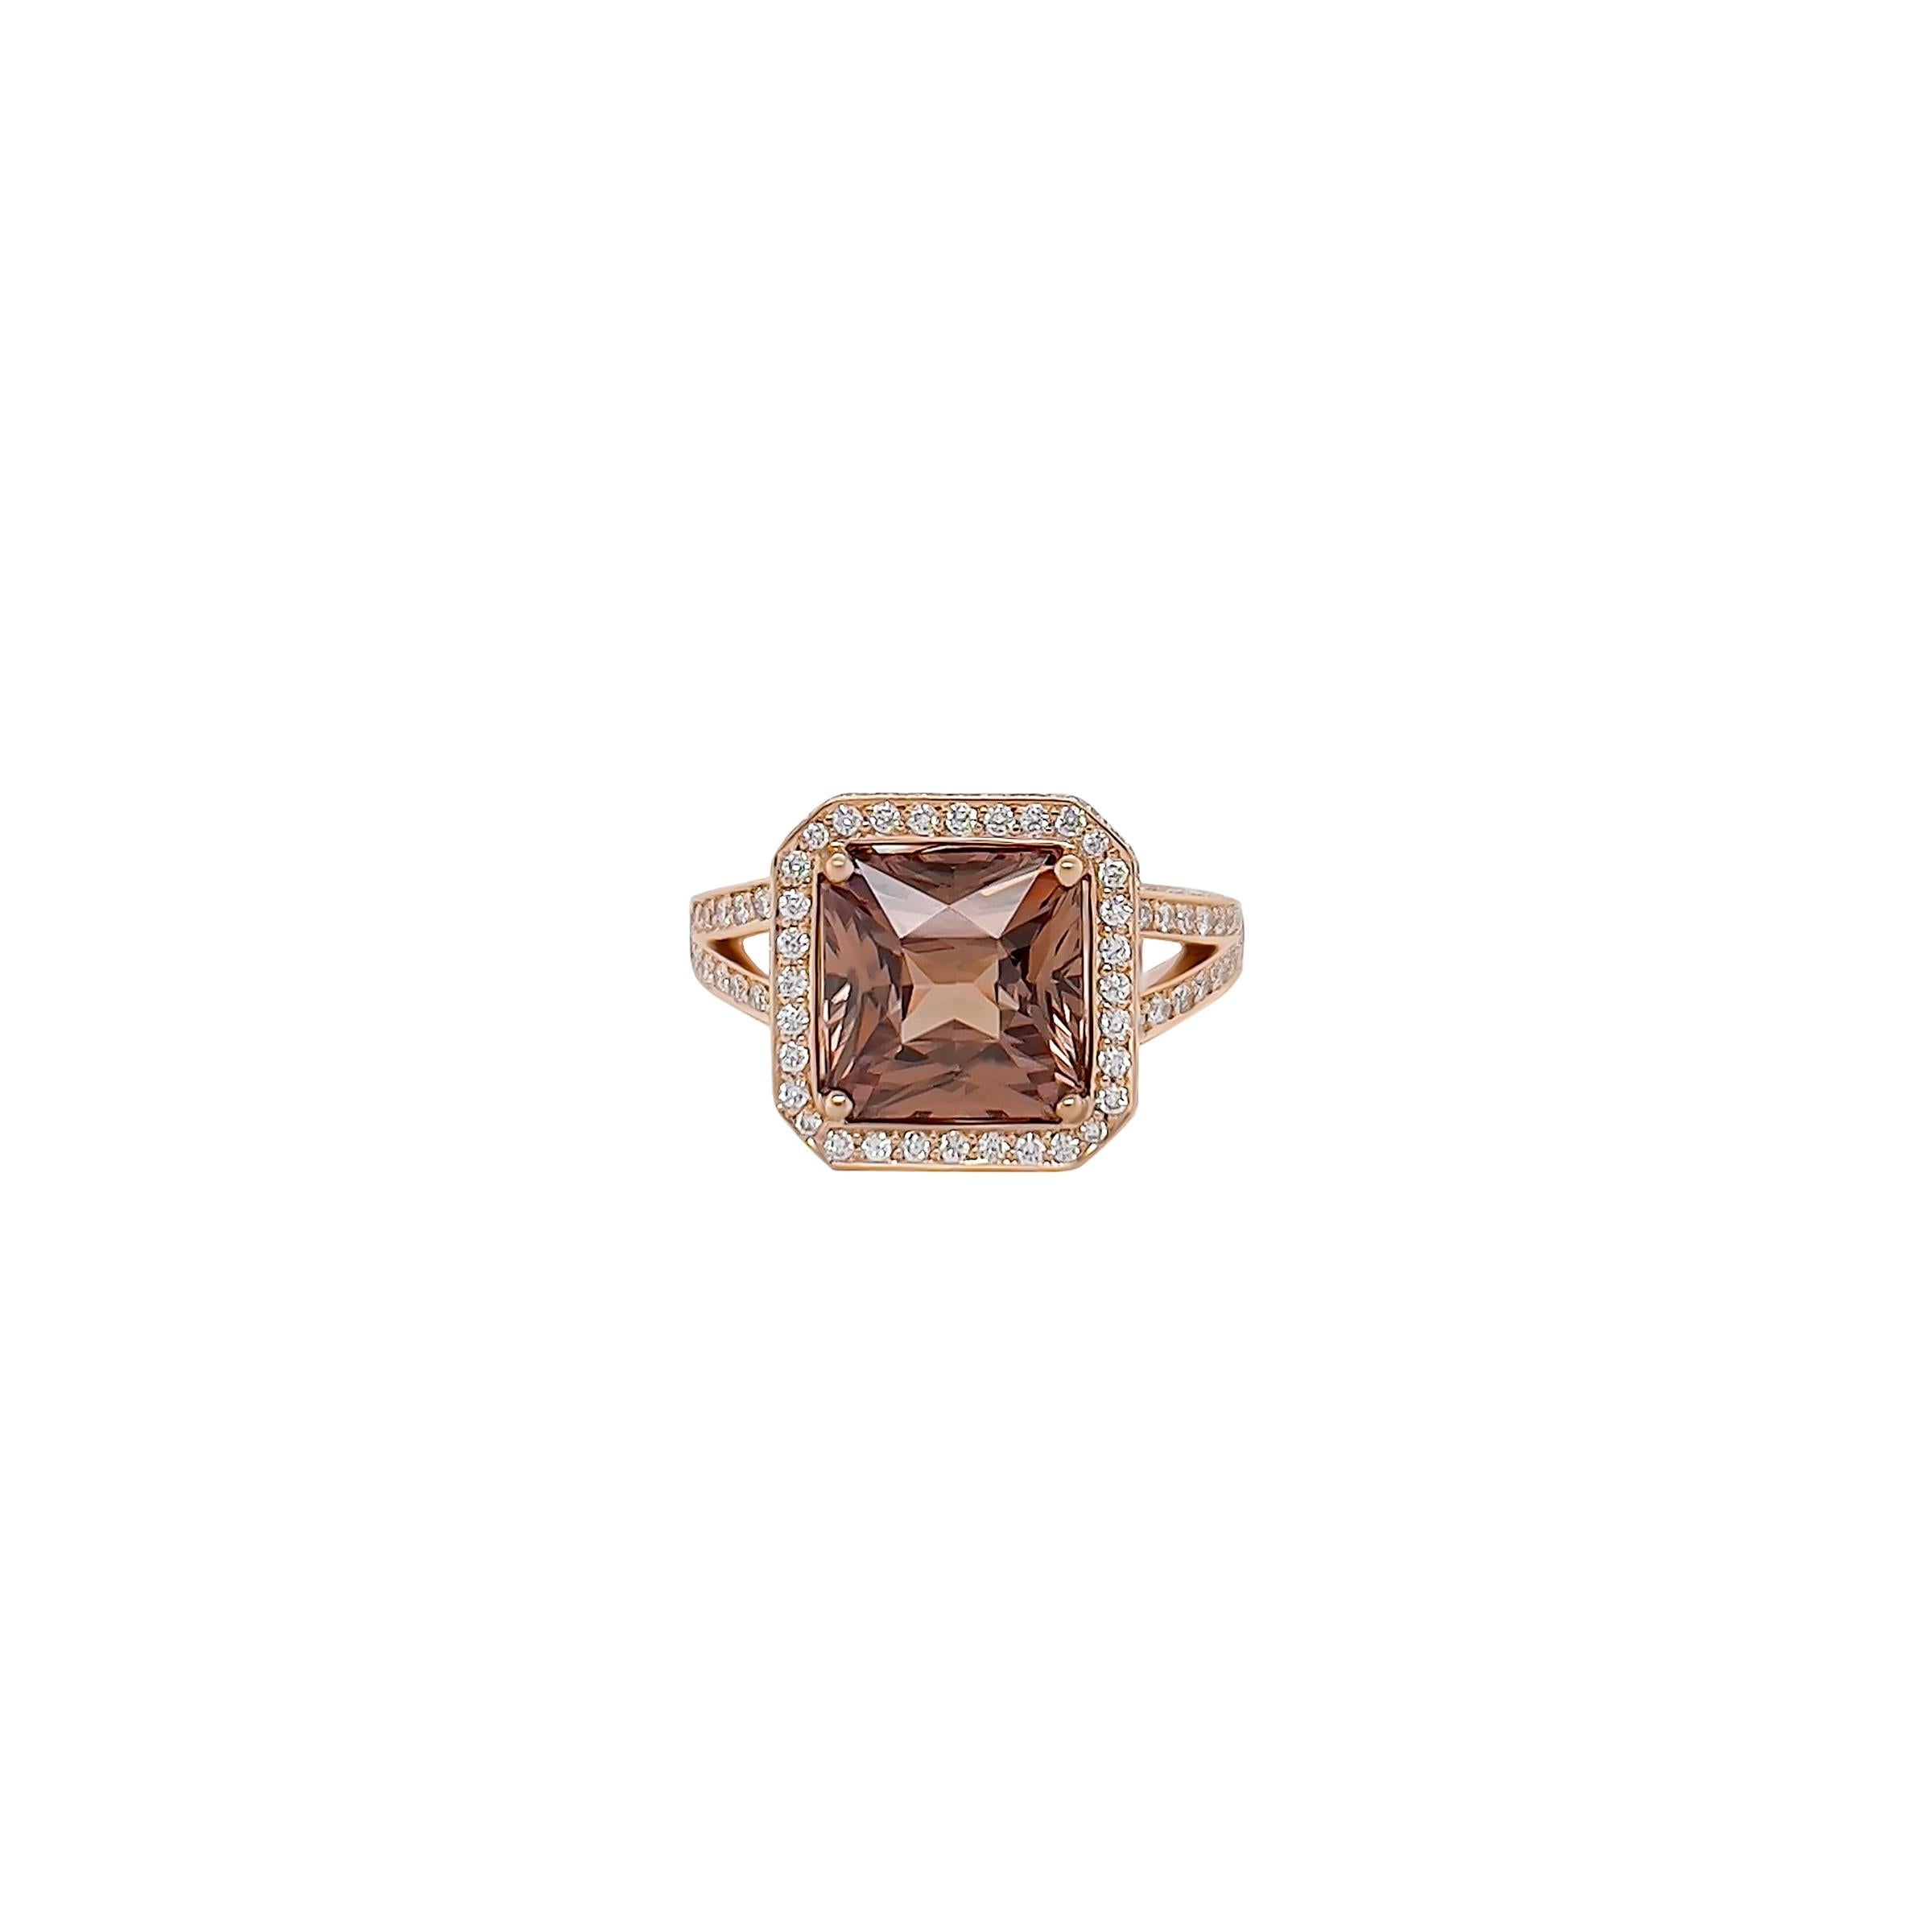 This  4.47ct princess cut natural brown zircon is surrounded by a pave'd diamond halo. Set in 18k Rose Gold, high quality F coloured Pave diamonds also decorate the band and shank in this intrigue, simple yet elegant design. 

Brown Zircon - 4.47cts